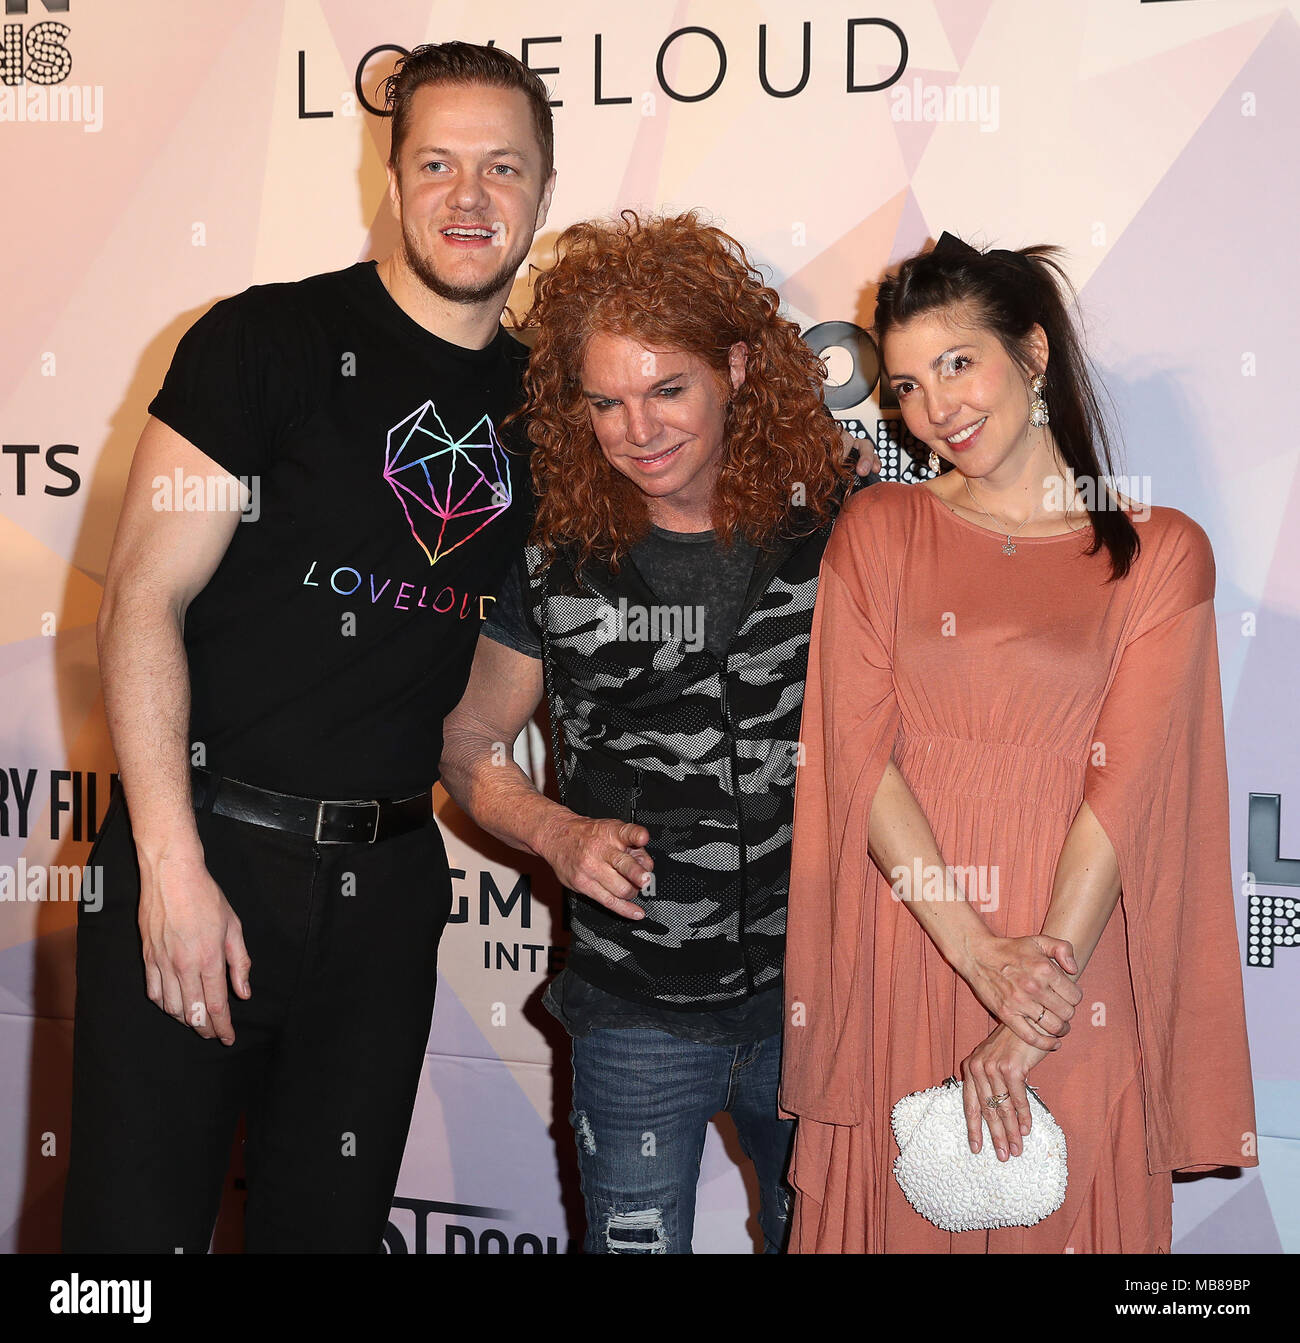 'Believer' at KA Theatre in the MGM Grand - Screening - Arrivals  Featuring: Dan Reynolds, Carrot Top, Aja Volkman Where: Las Vegas, Nevada, United States When: 09 Mar 2018 Credit: Judy Eddy/WENN.com Stock Photo